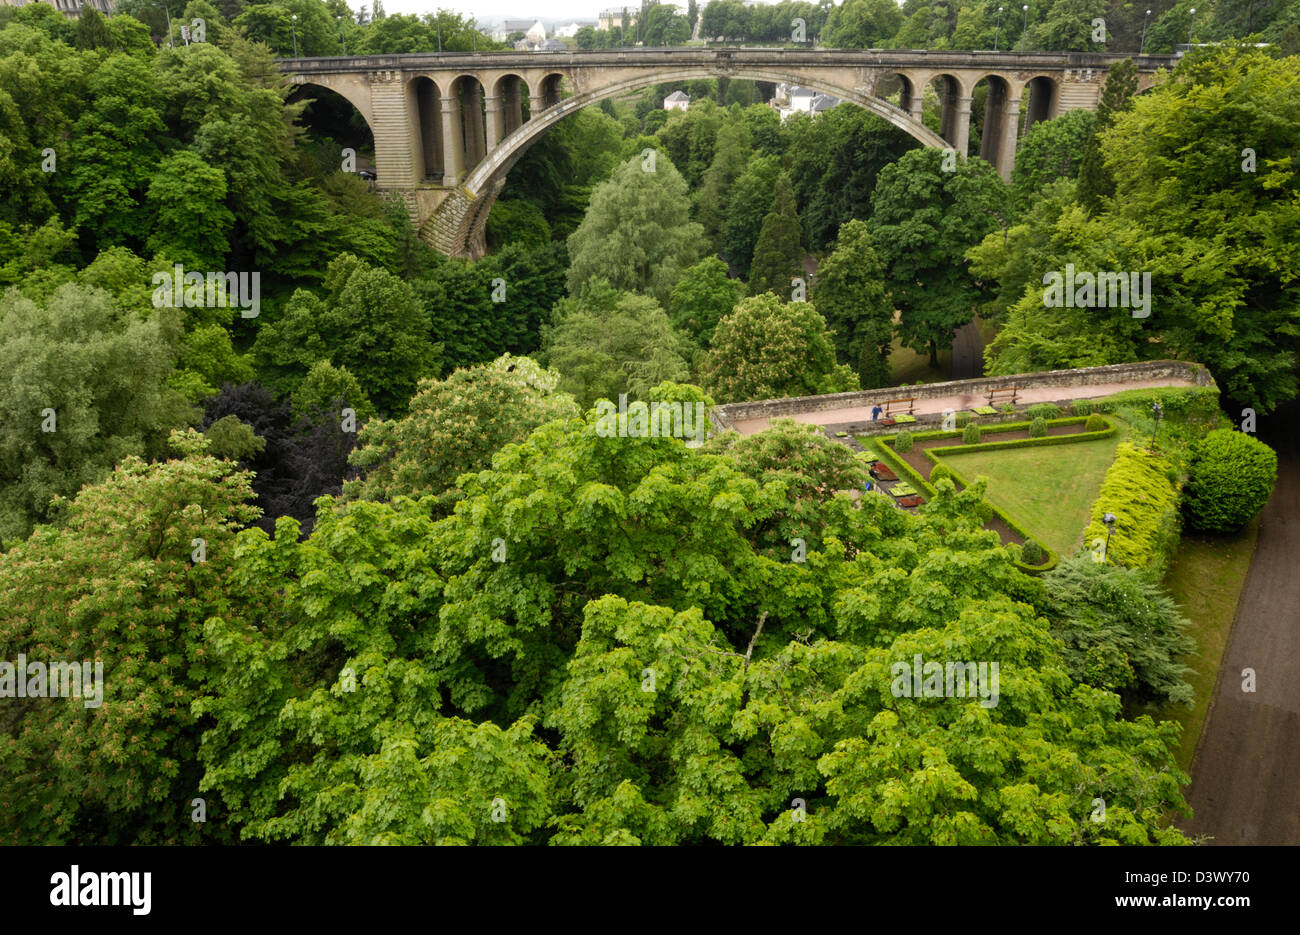 Adolphe Bridge and the Pétrusse Valley, from Constitution Sqaure Stock Photo